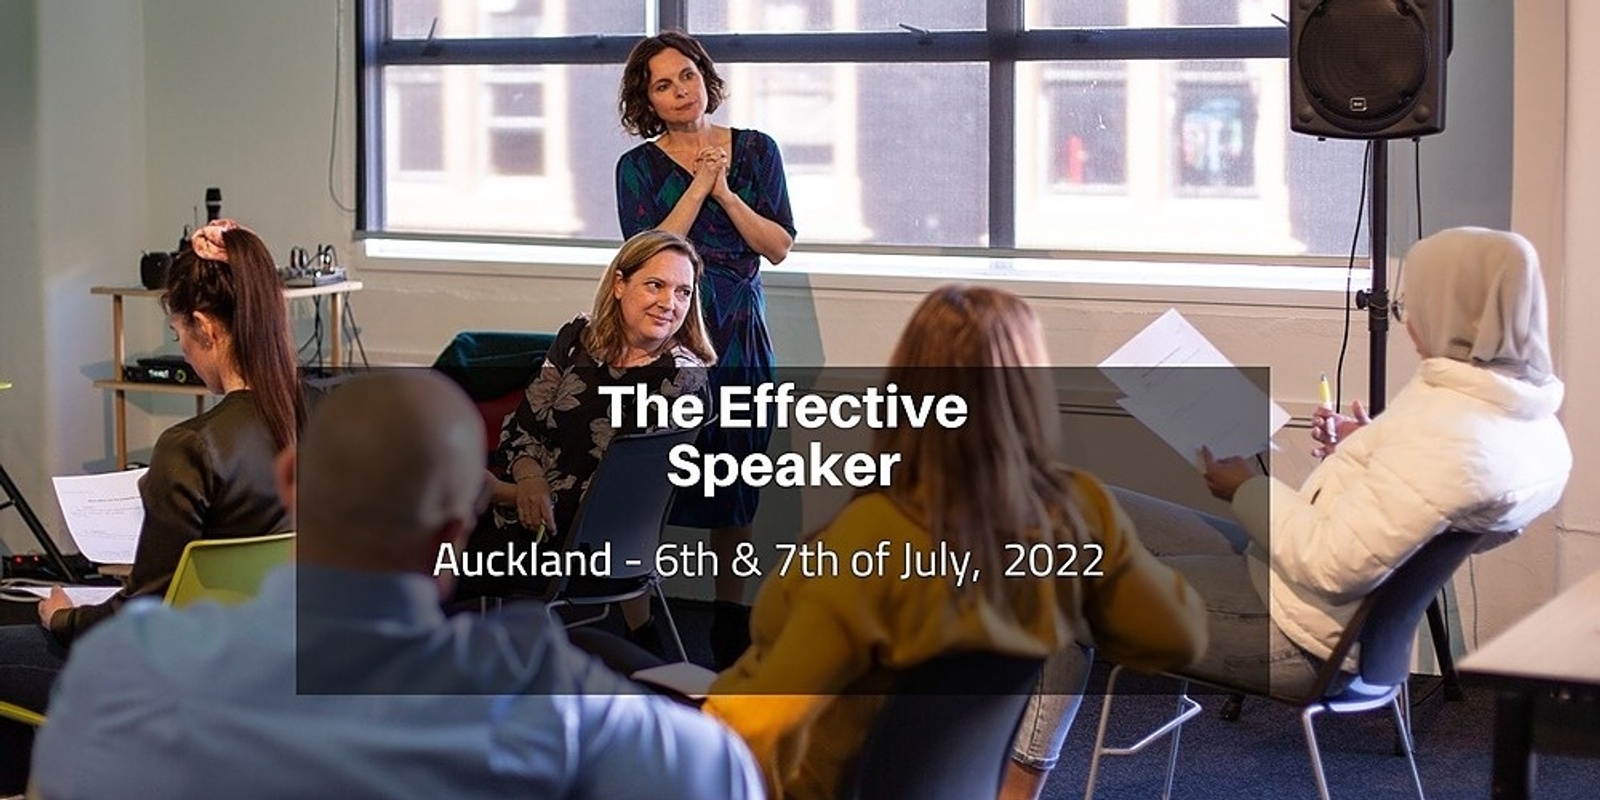 The Effective Speaker - Auckland 6th & 7th of July, 2022